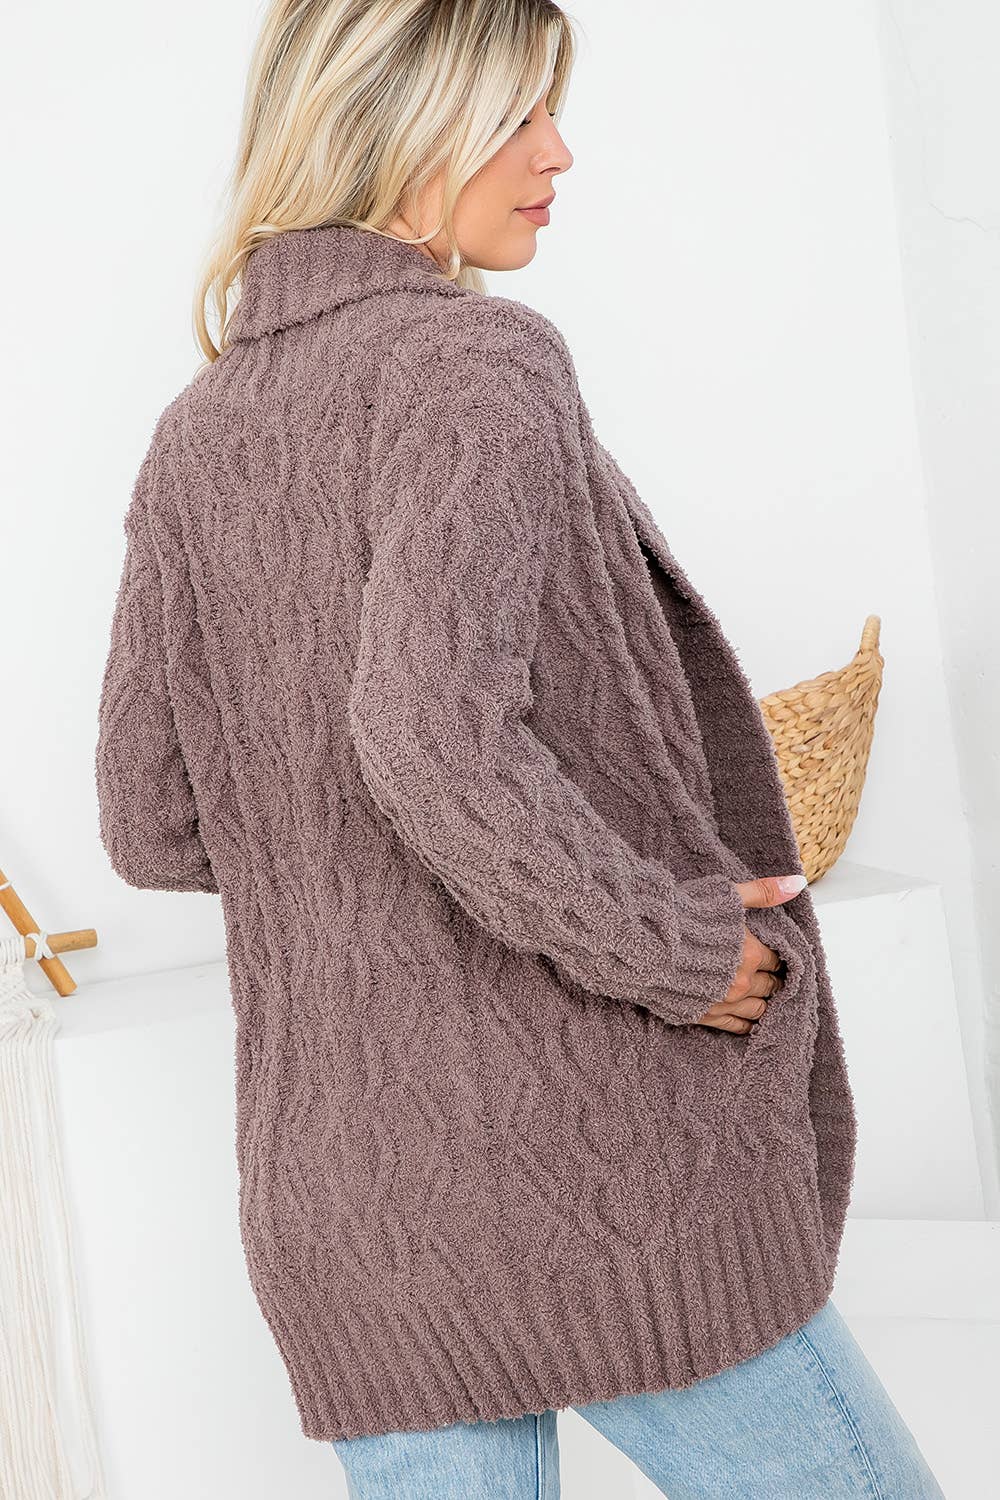 Supersoft Cable Sweater - Mushroom